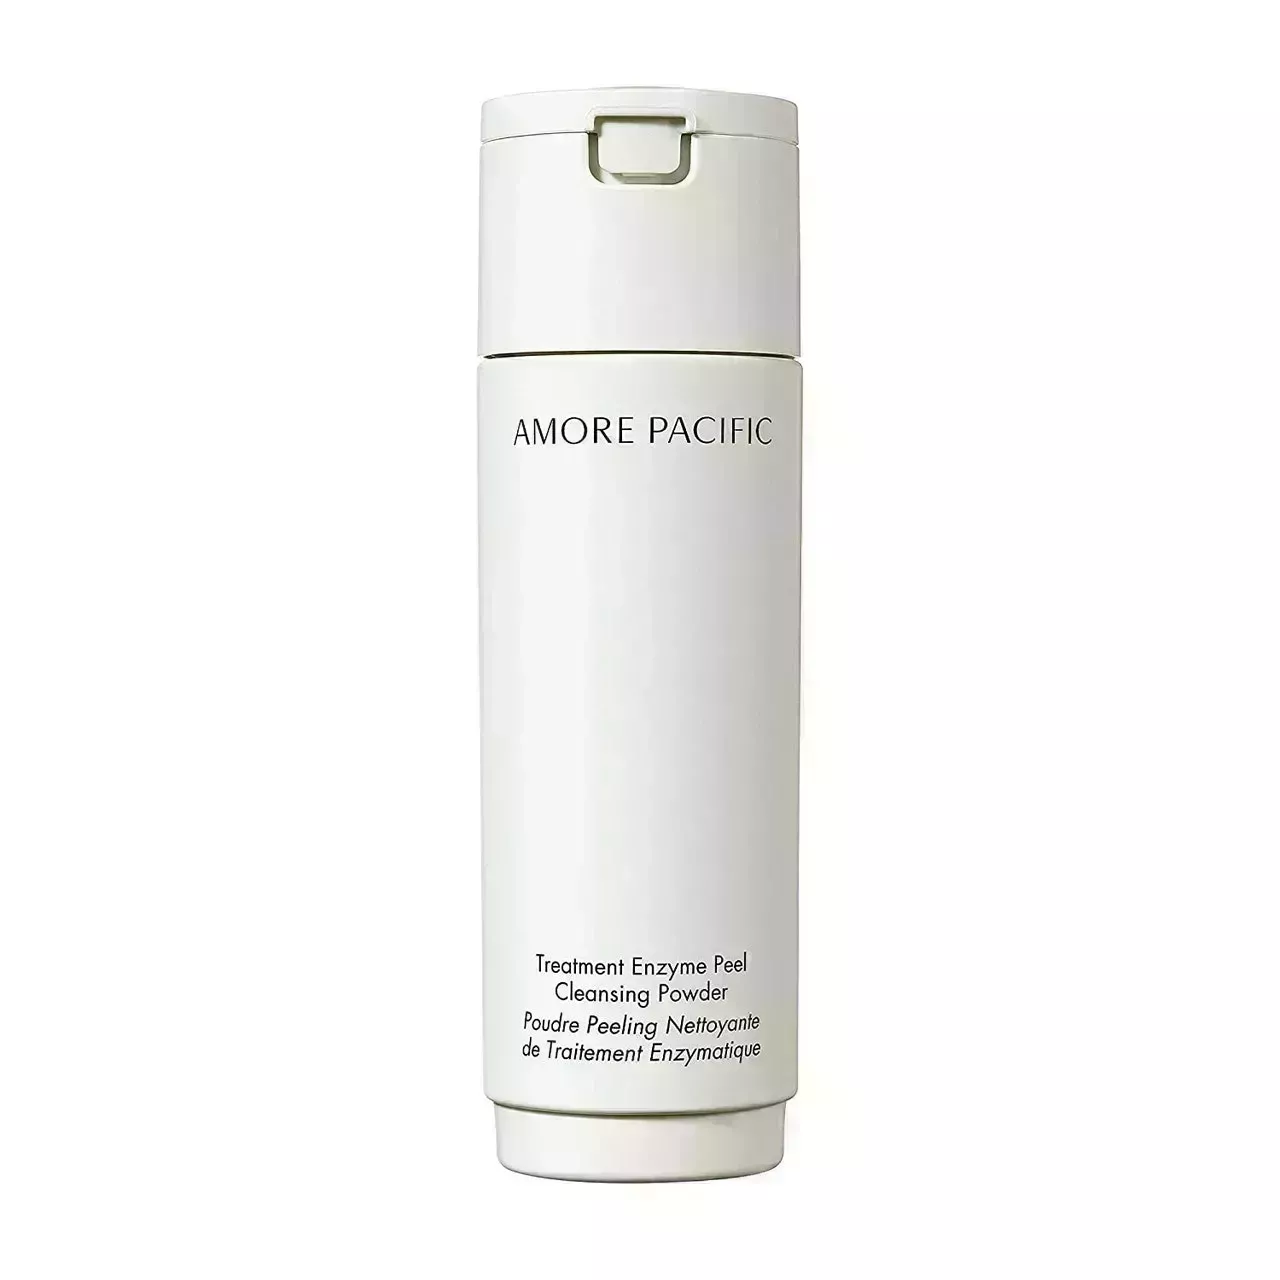 A light green bottle of Amorepacific Treatment Enzyme Peel Cleansing Powder on white background